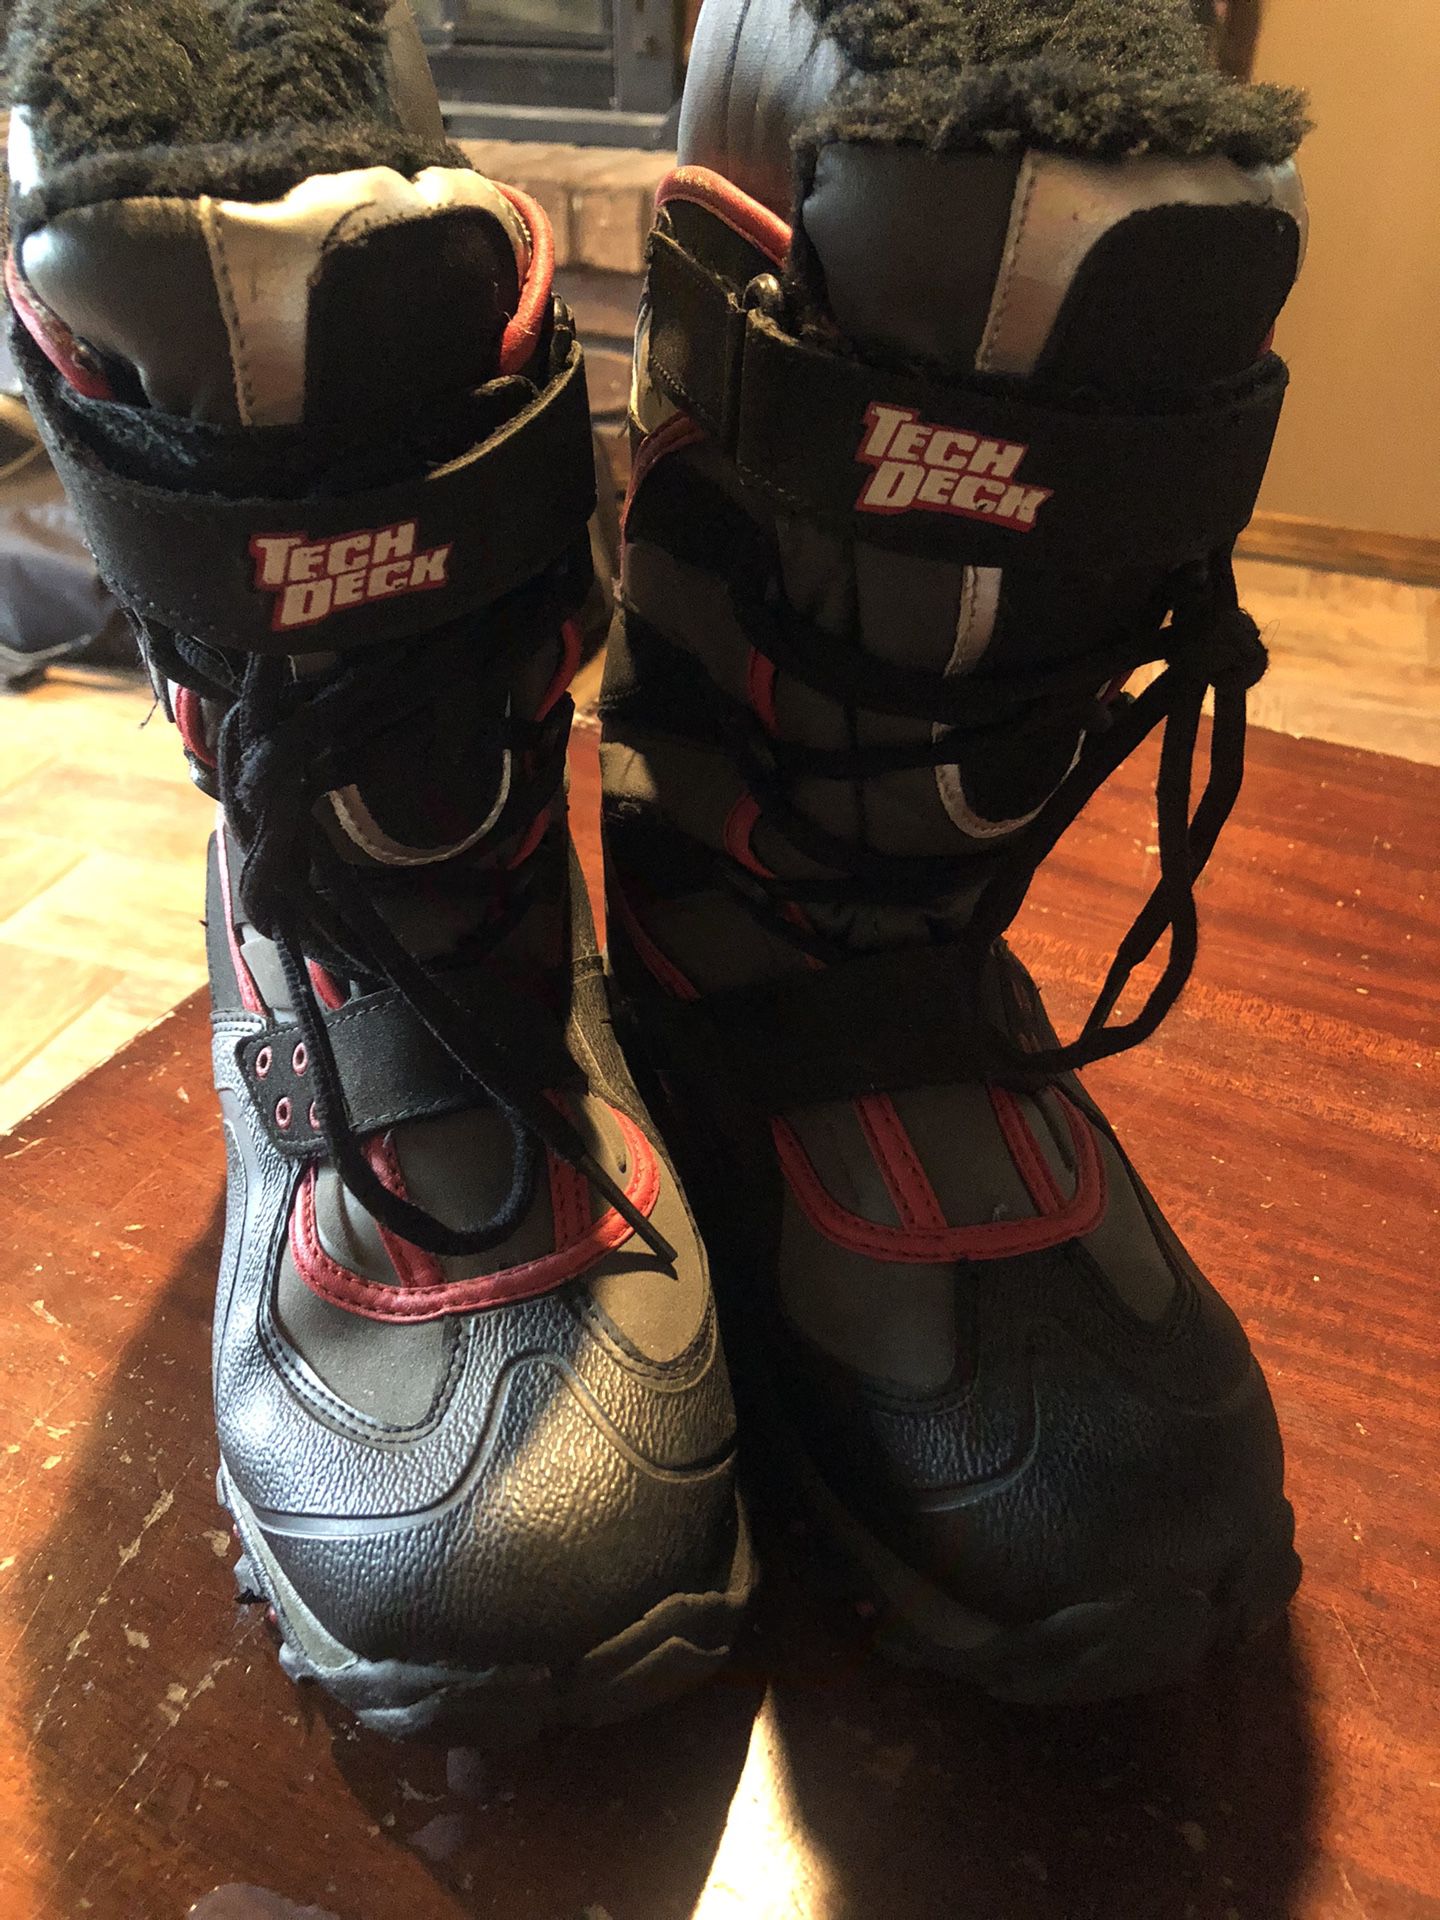 Tech Deck Youth Size 3 Snow Boots